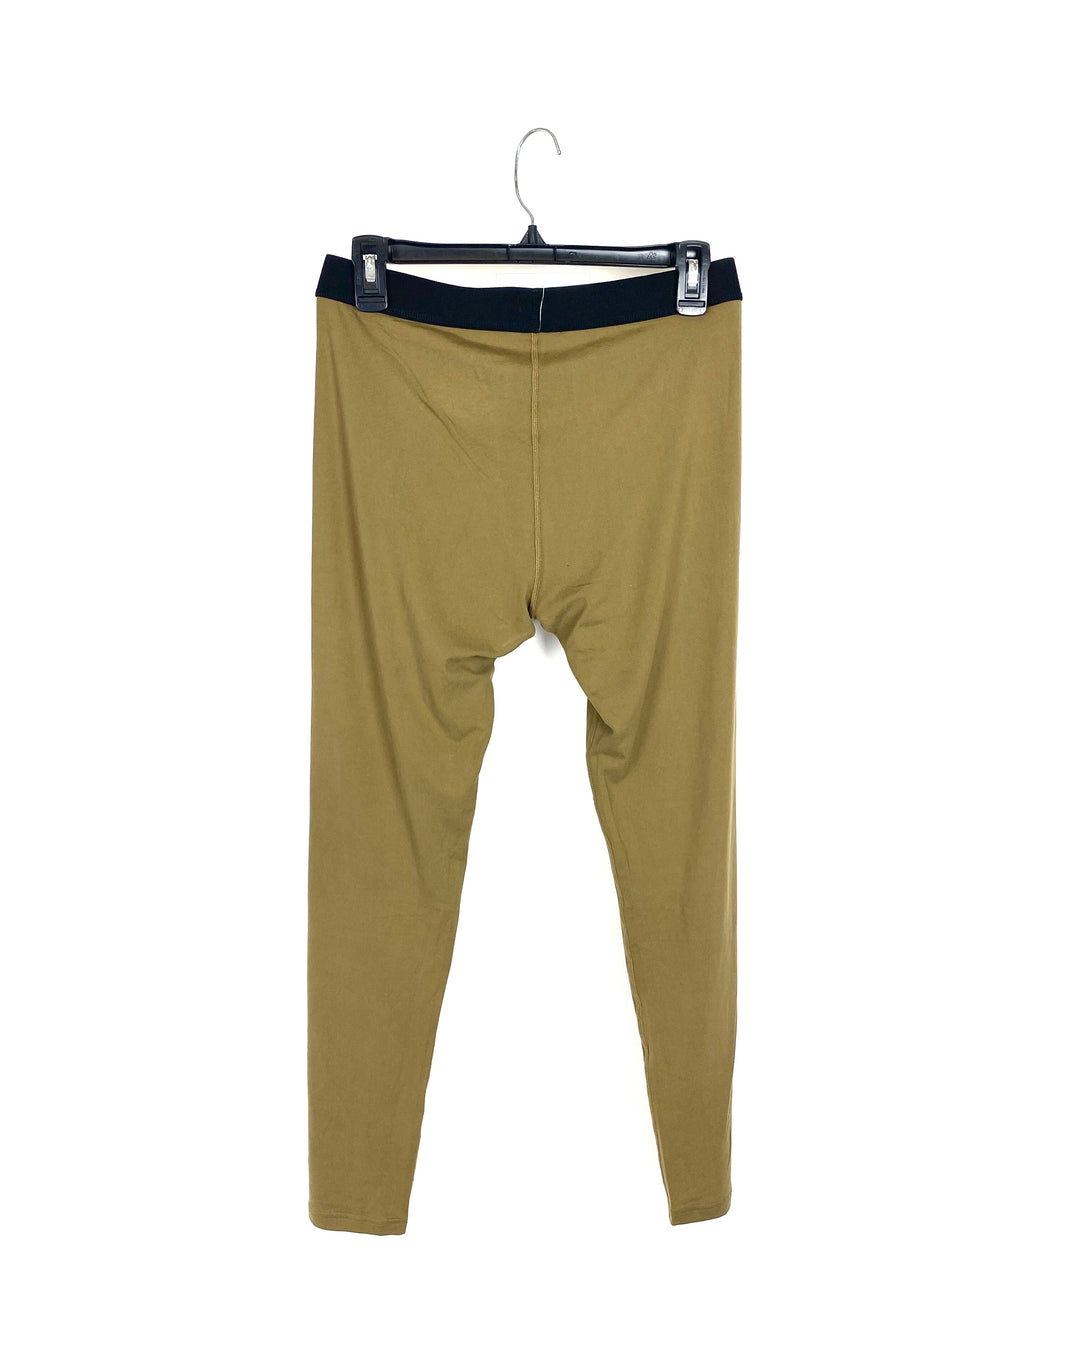 MENS Mustard Yellow Athletic Fitted Pants - Medium